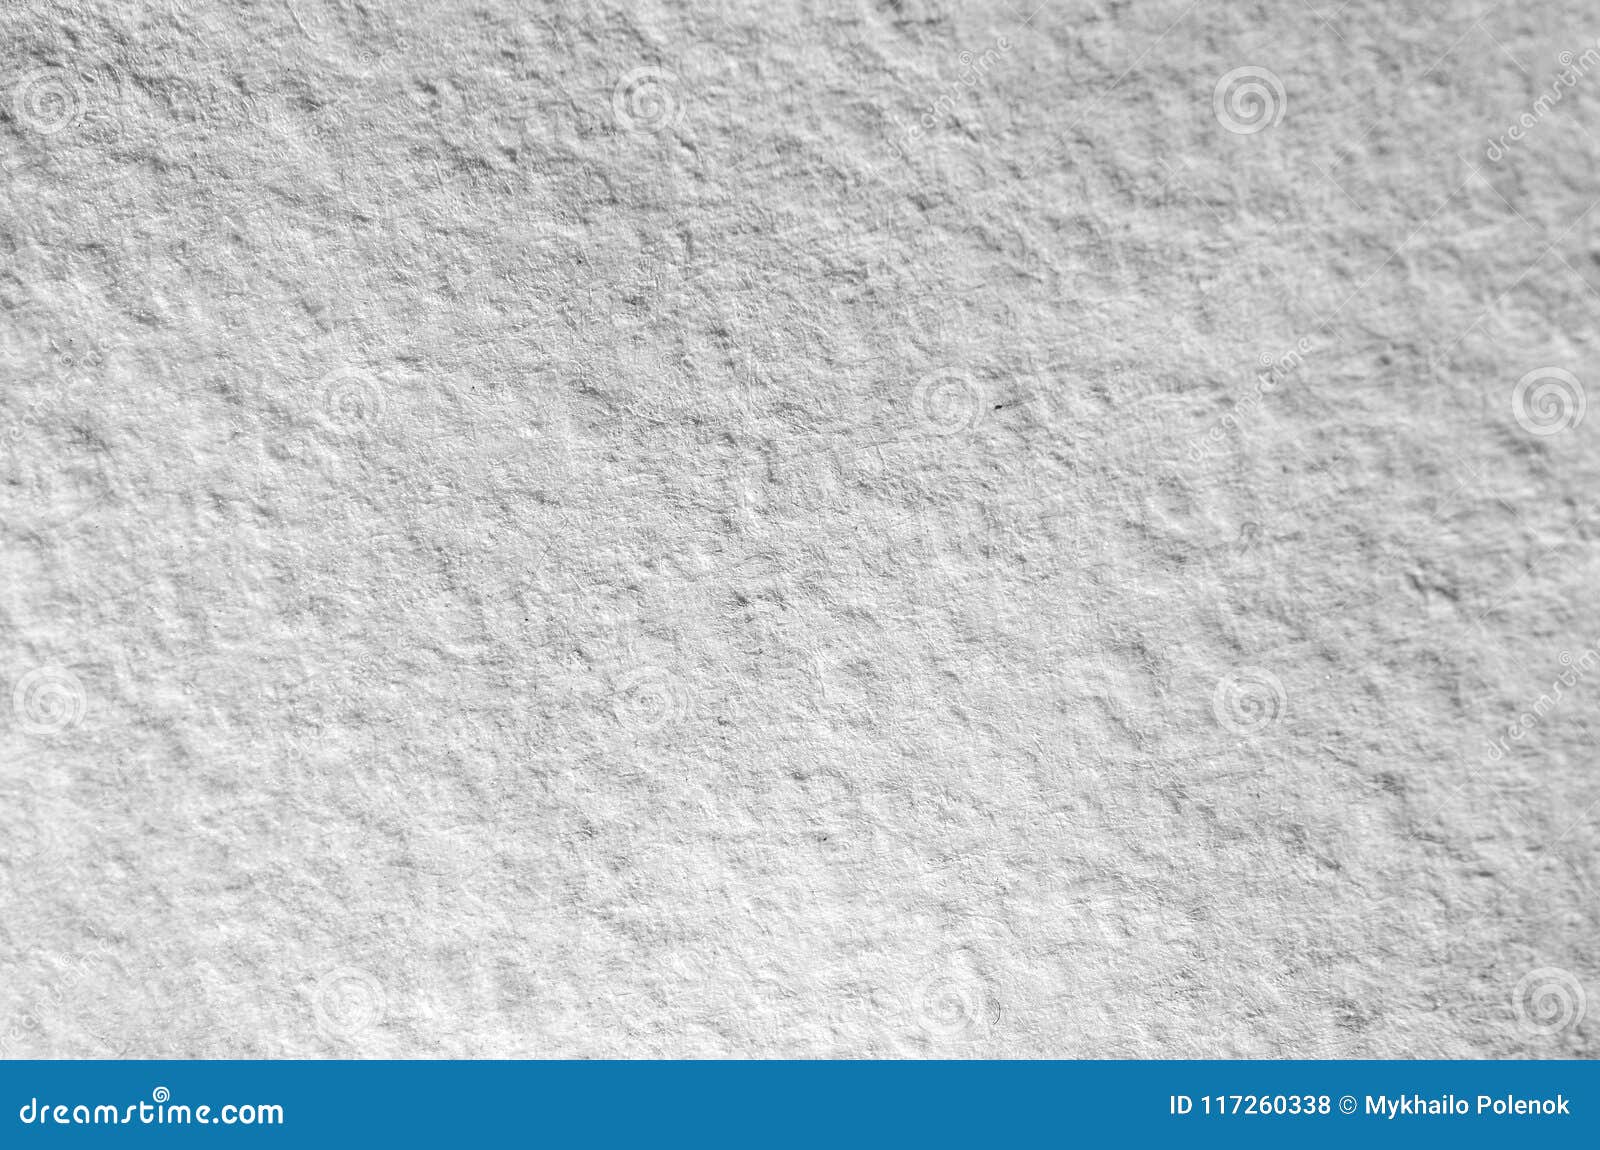 Texture Of Thick Paper Intended For Watercolor Painting. Macro Snapshot Of  Details Of The Relief Paper Structure Stock Photo, Picture and Royalty Free  Image. Image 93511382.